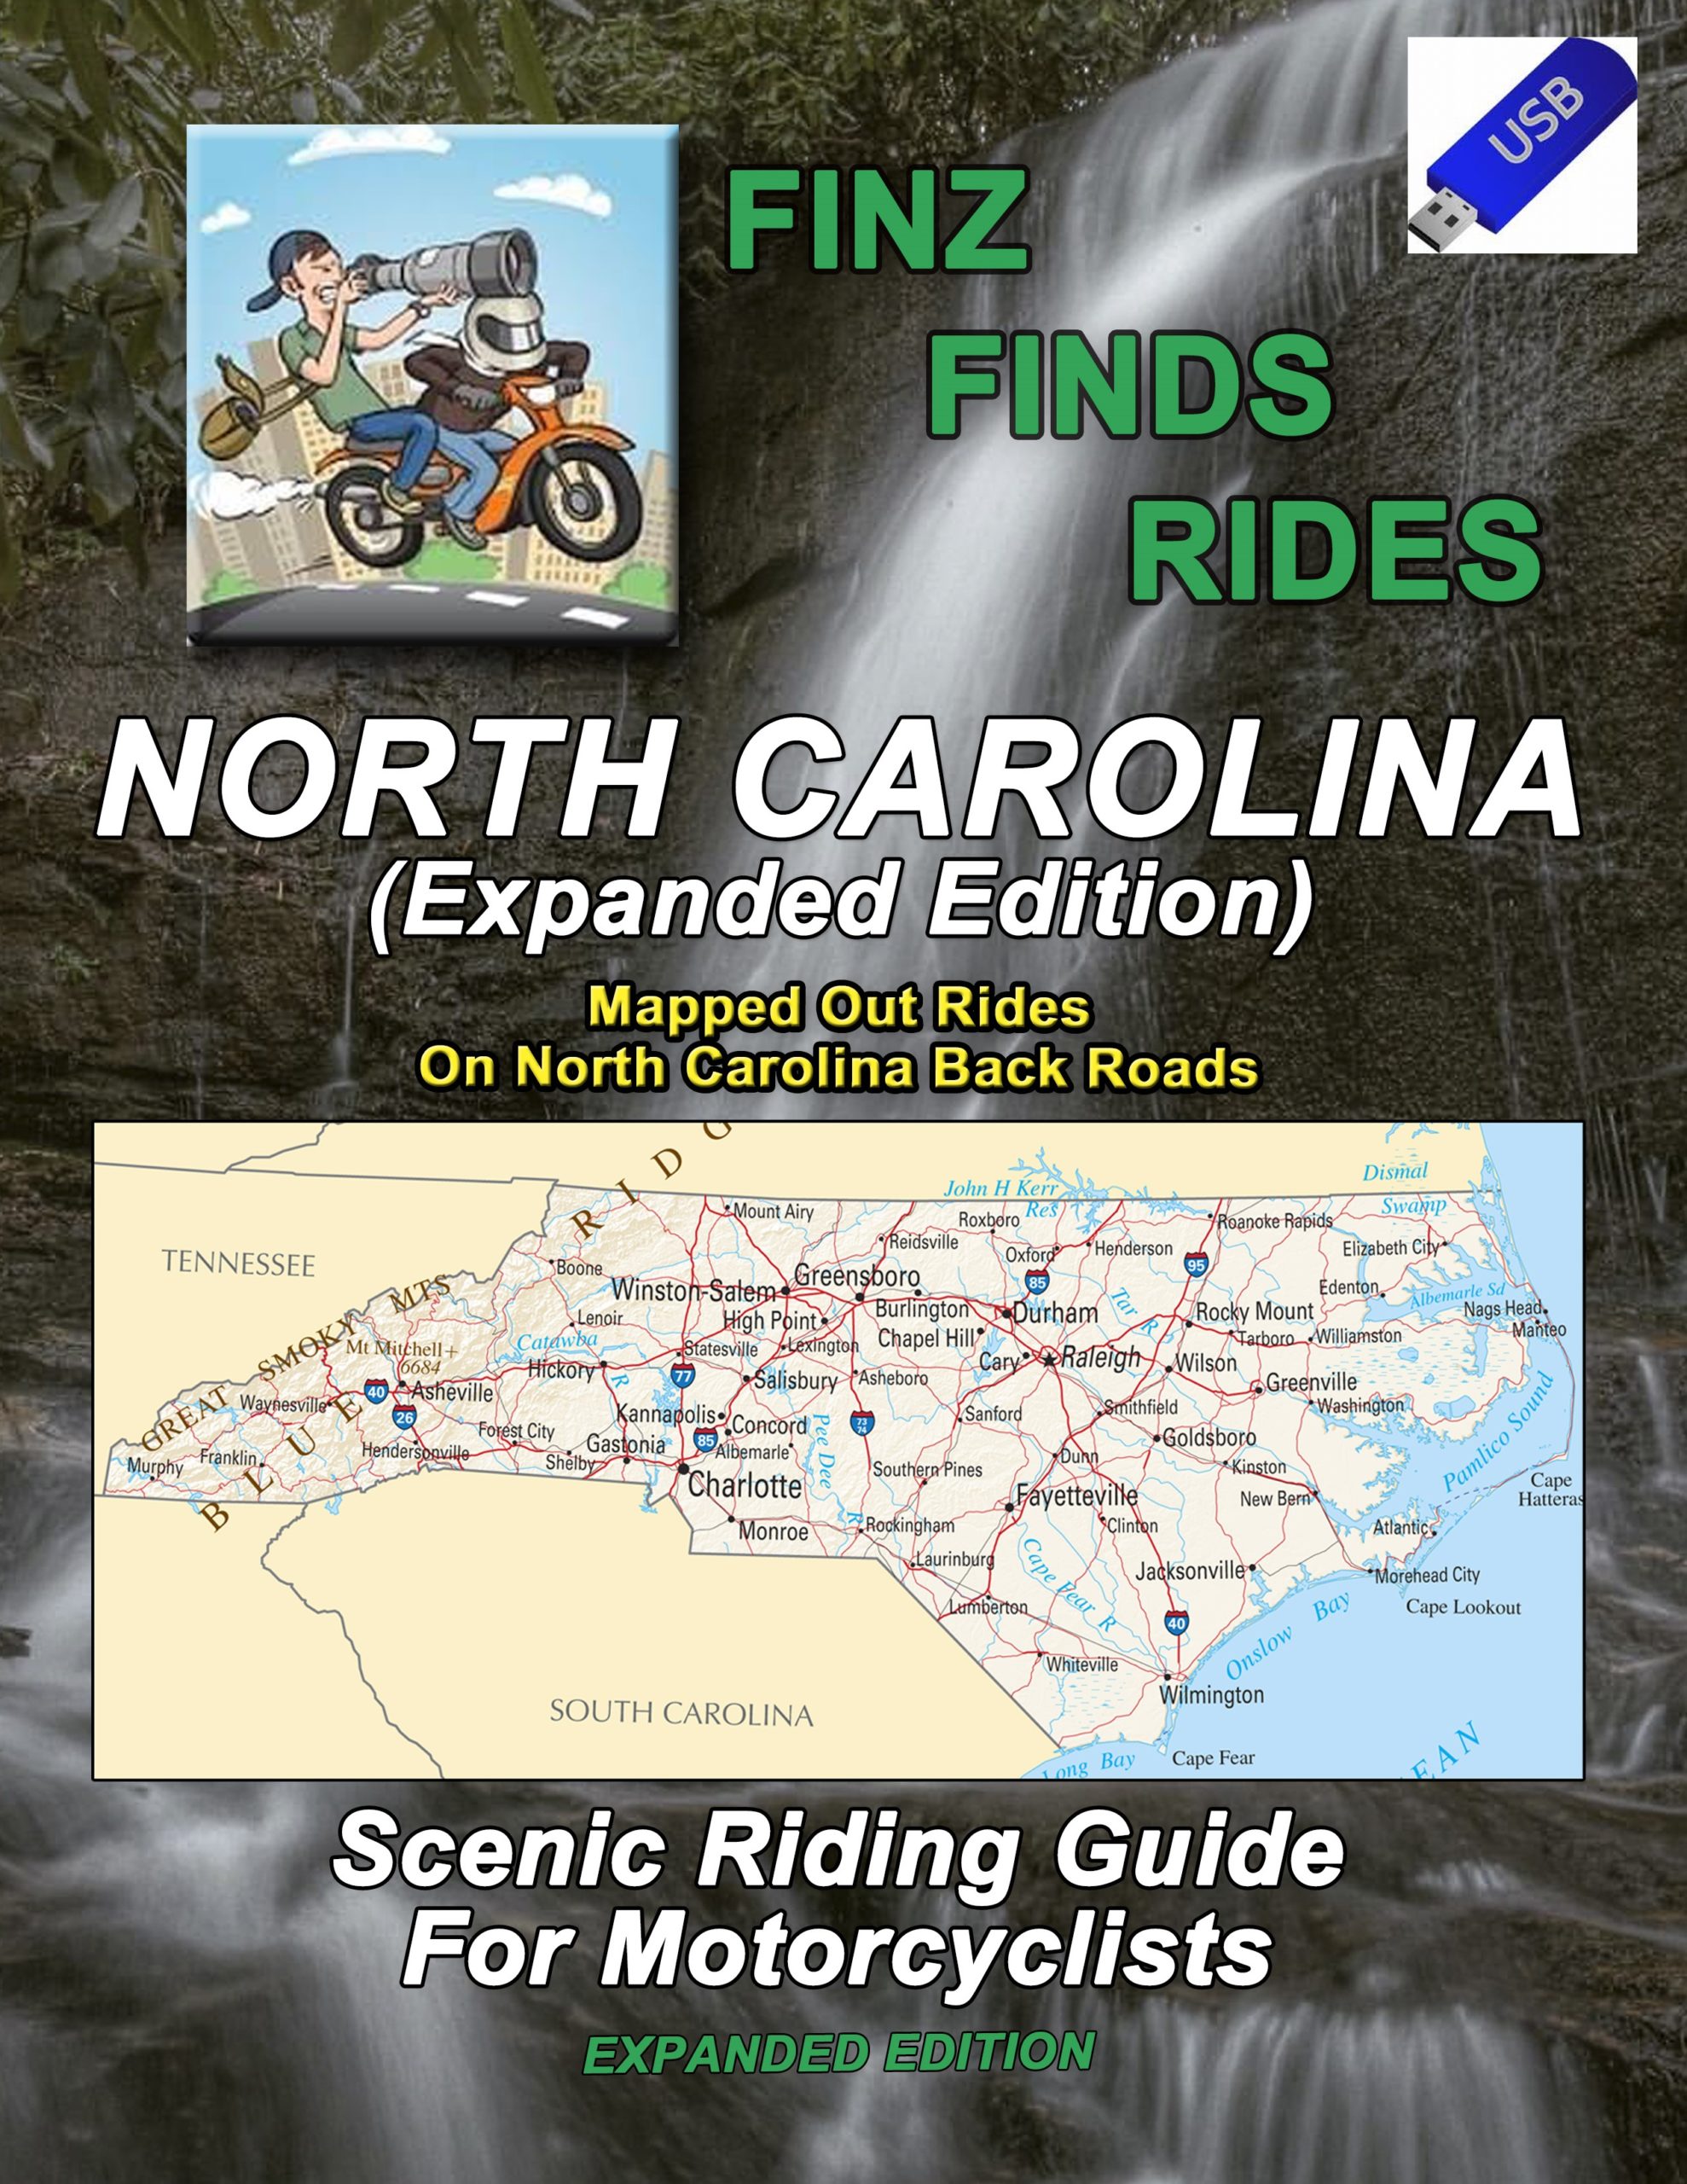 North Carolina Expanded Edition Adventure Package